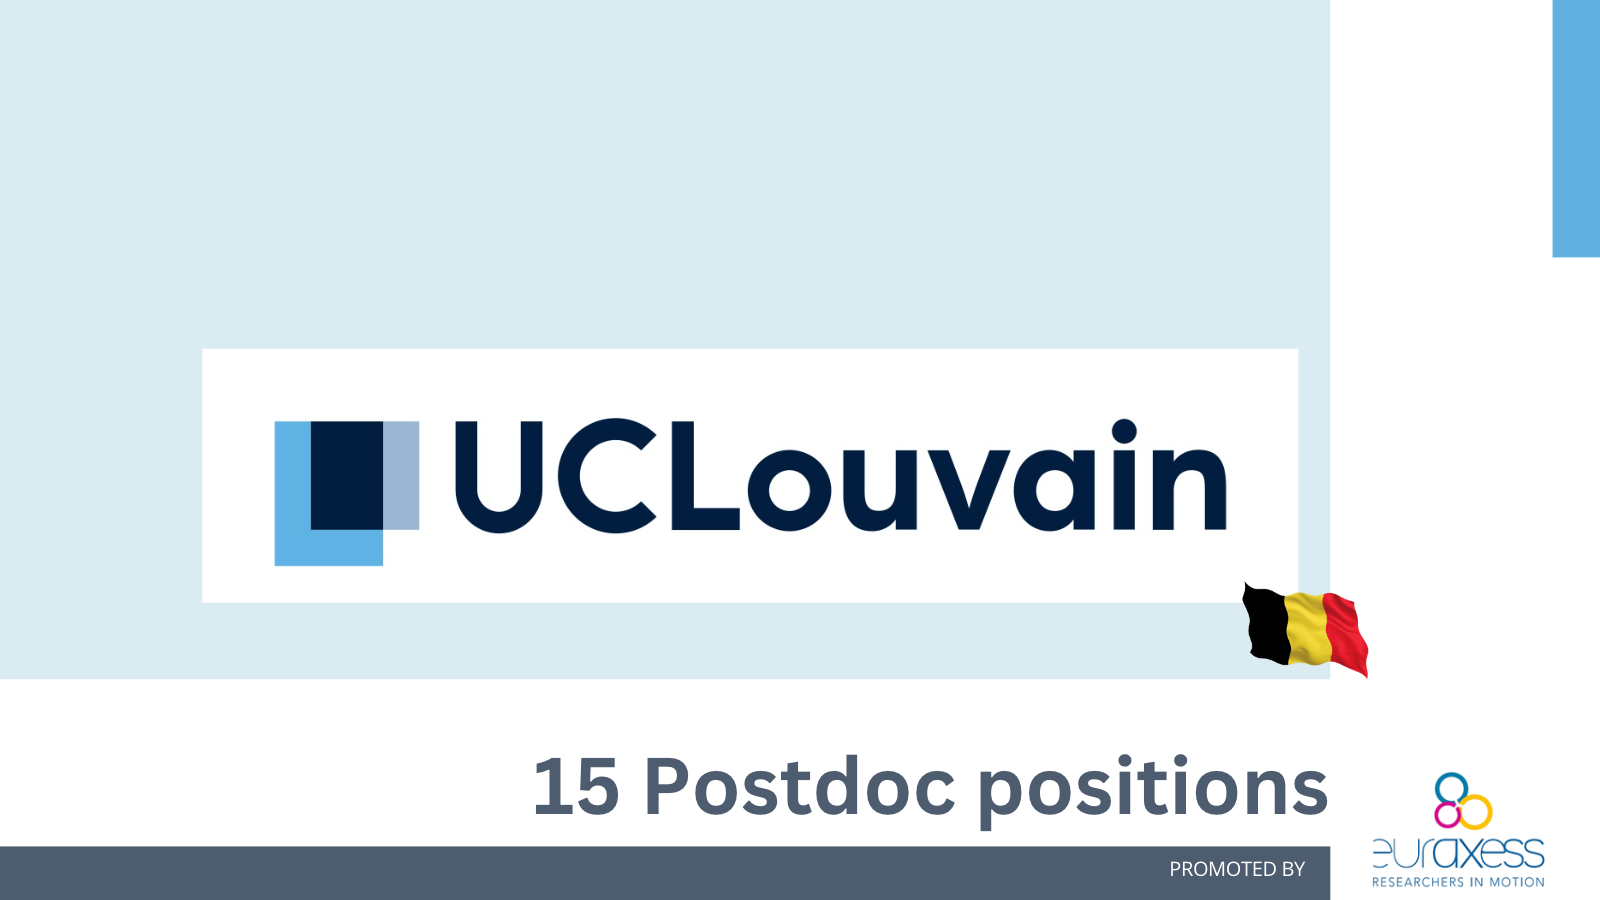 Belgium 15 postdoc fellowships in all fields of knowledge at UC